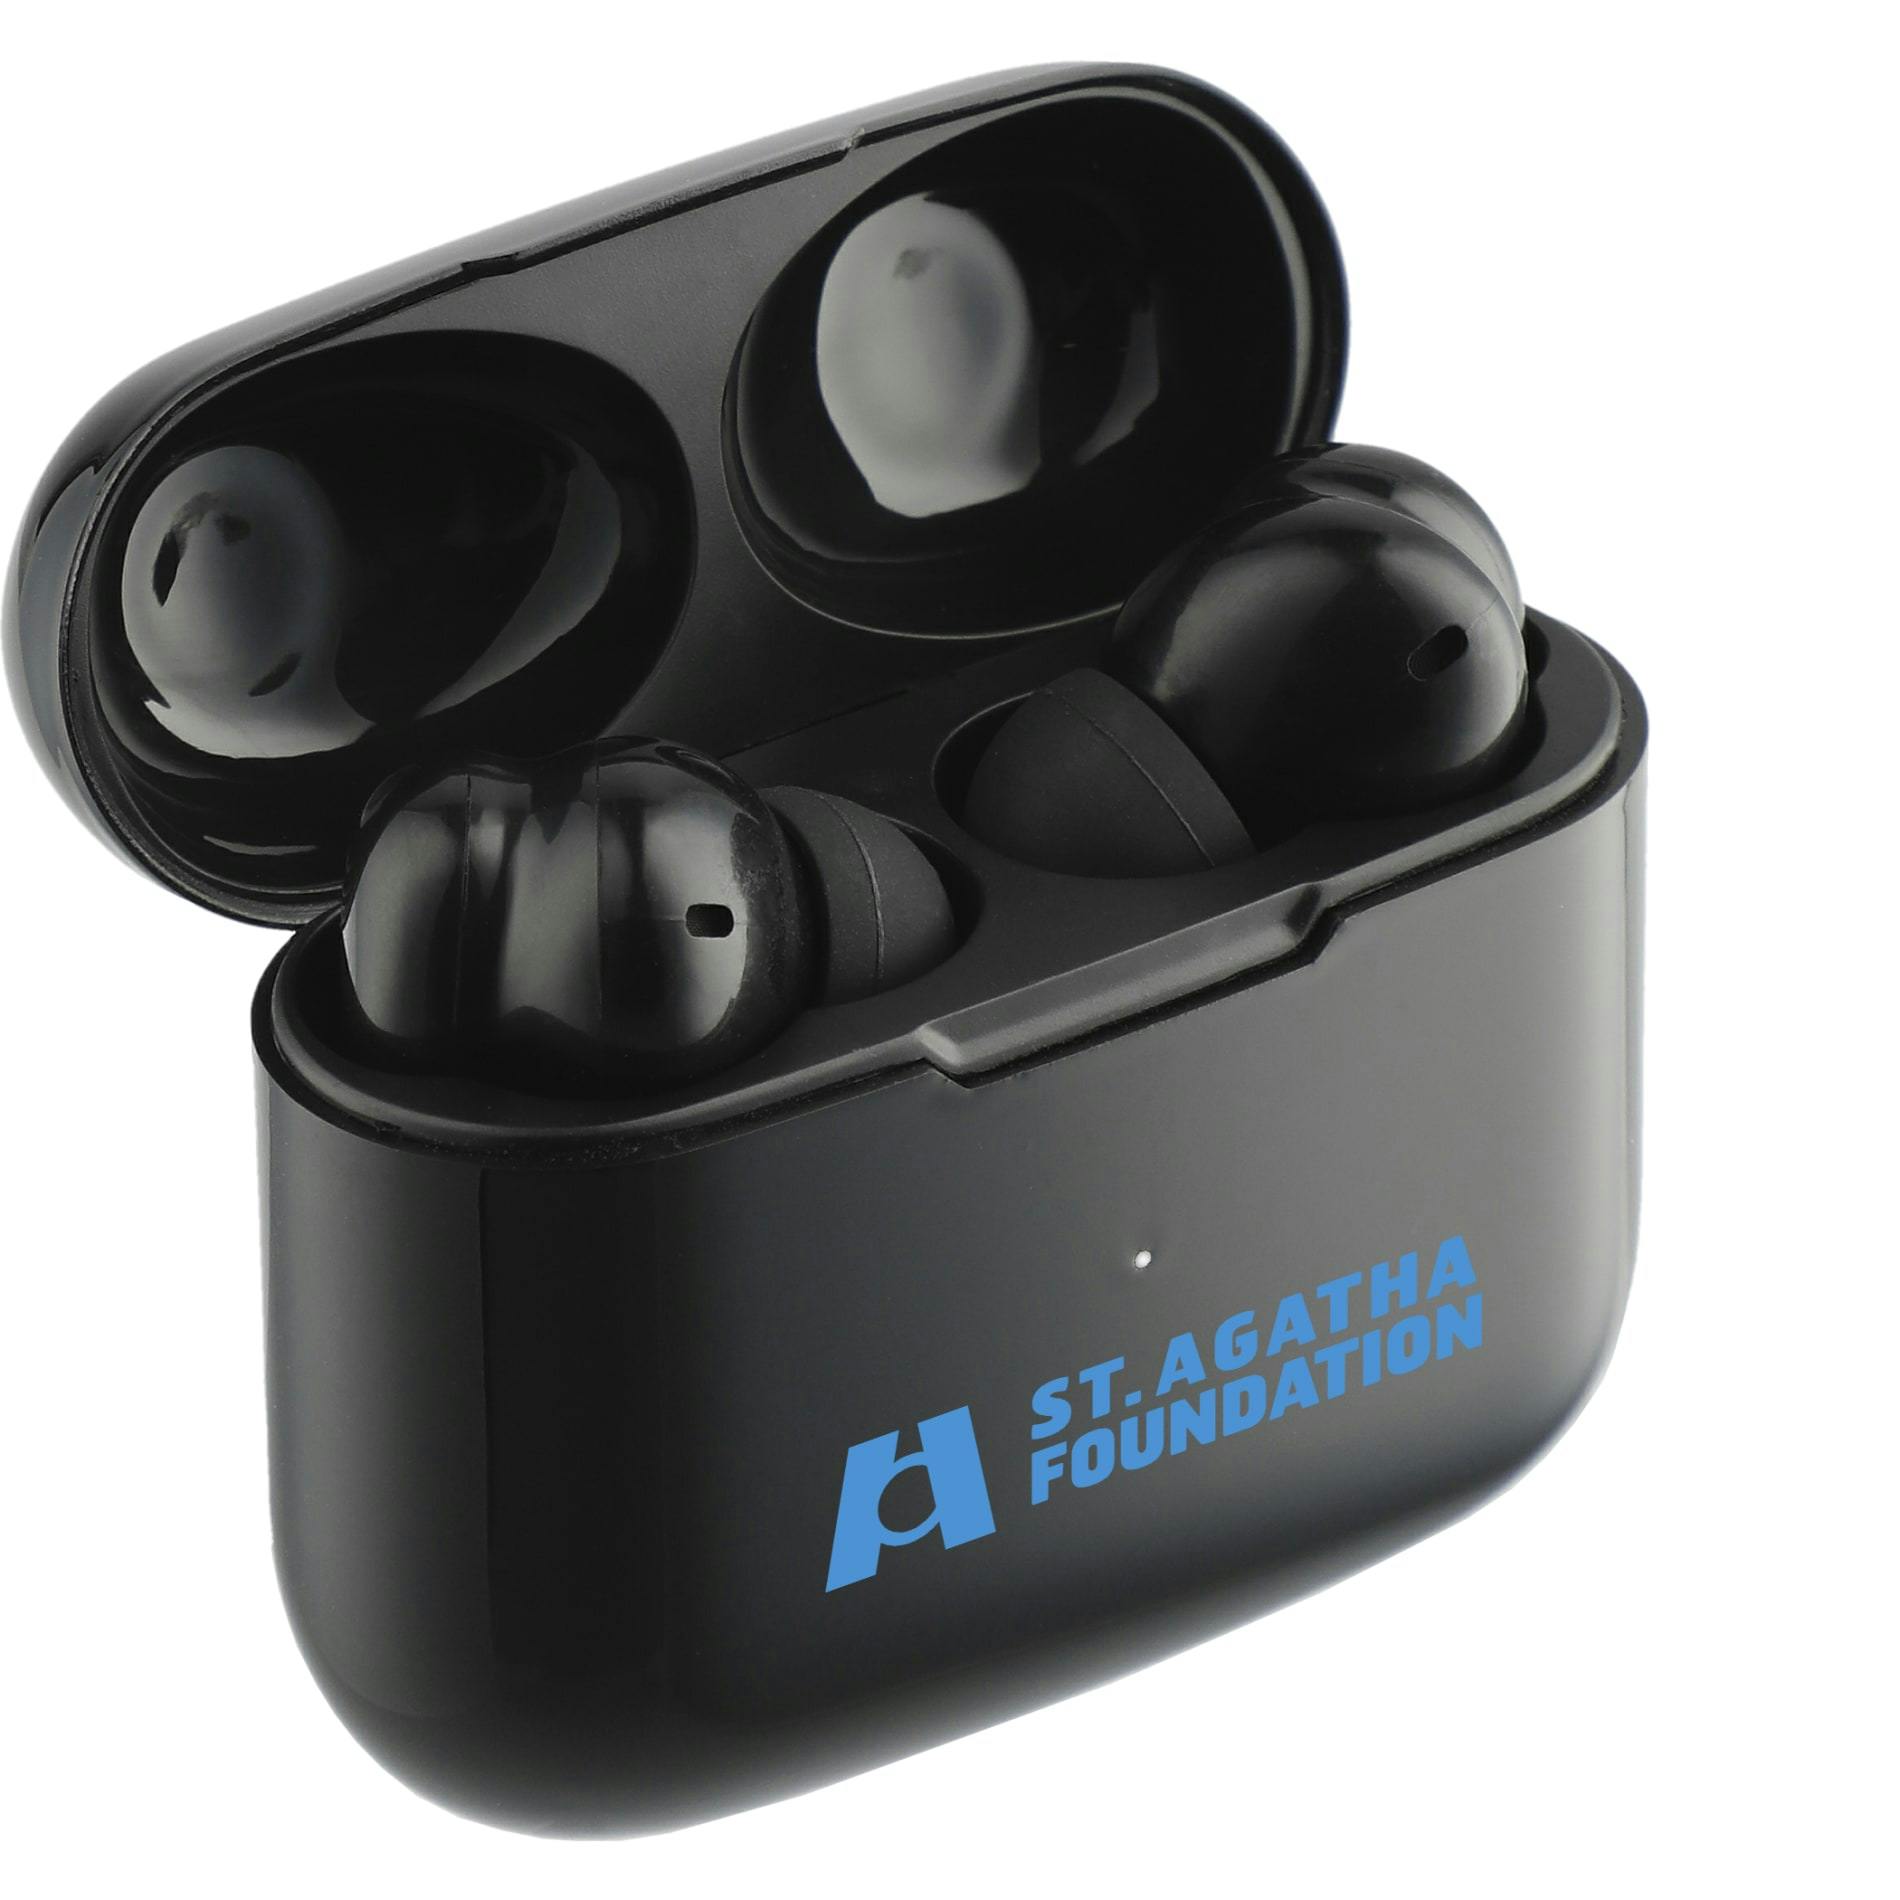 Ifidelity Auto Pair True Wireless Earbuds with ANC - additional Image 6